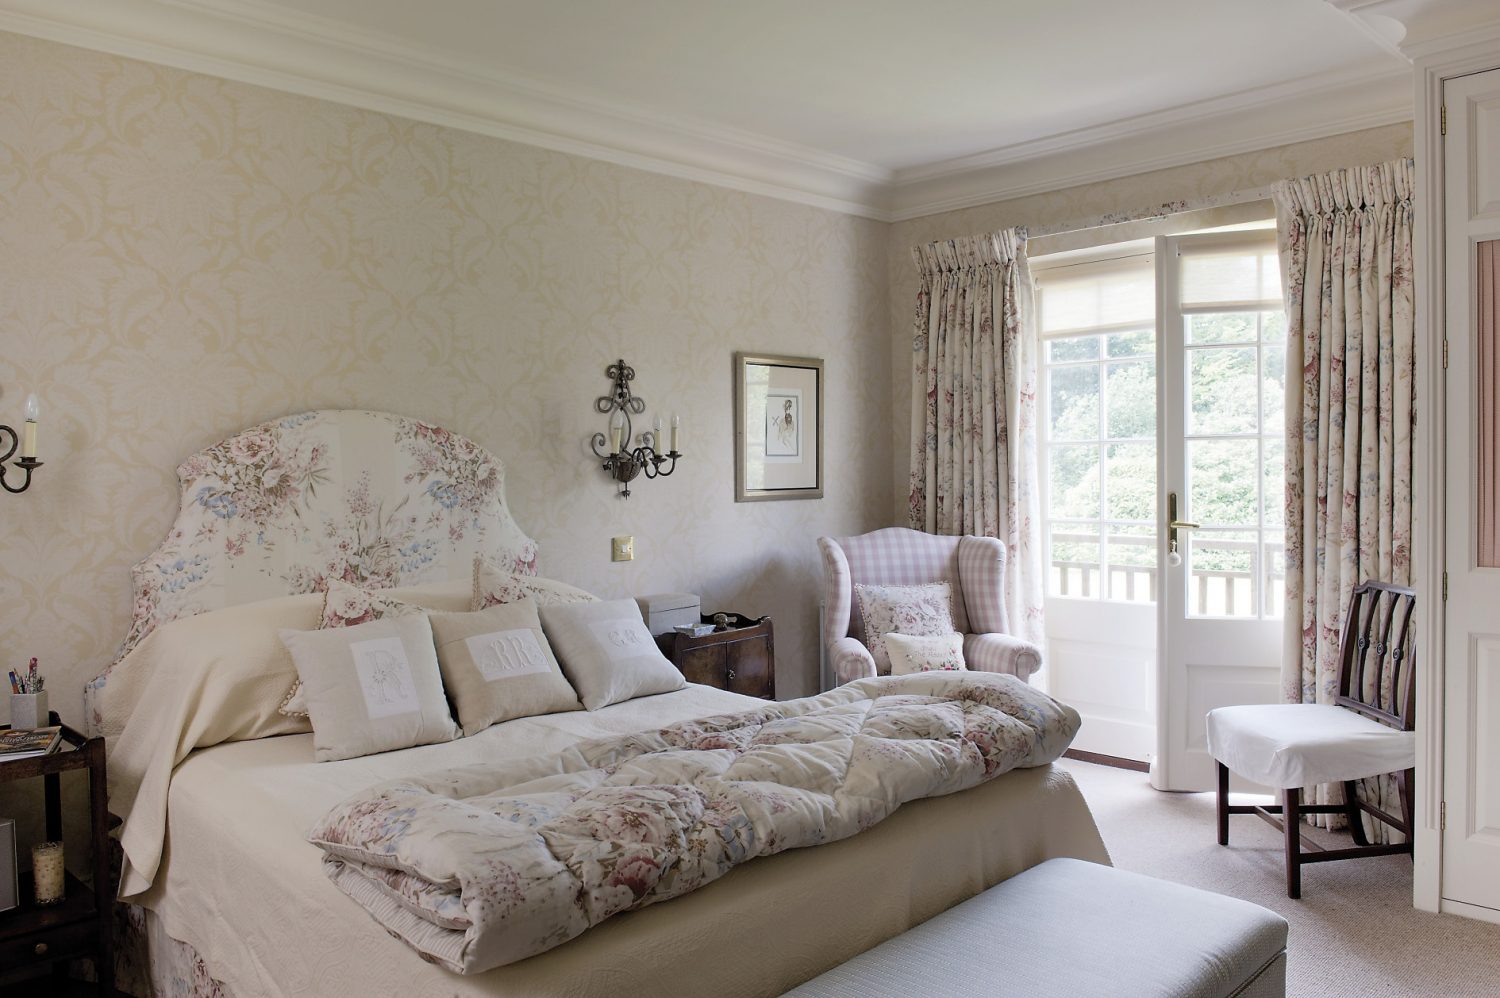 Ro’s bedroom overlooks the garden and has French windows onto a small wooden balcony. The room is light and serene, with a pale wallpaper and a bedhead and curtains made of the same softly coloured chintz